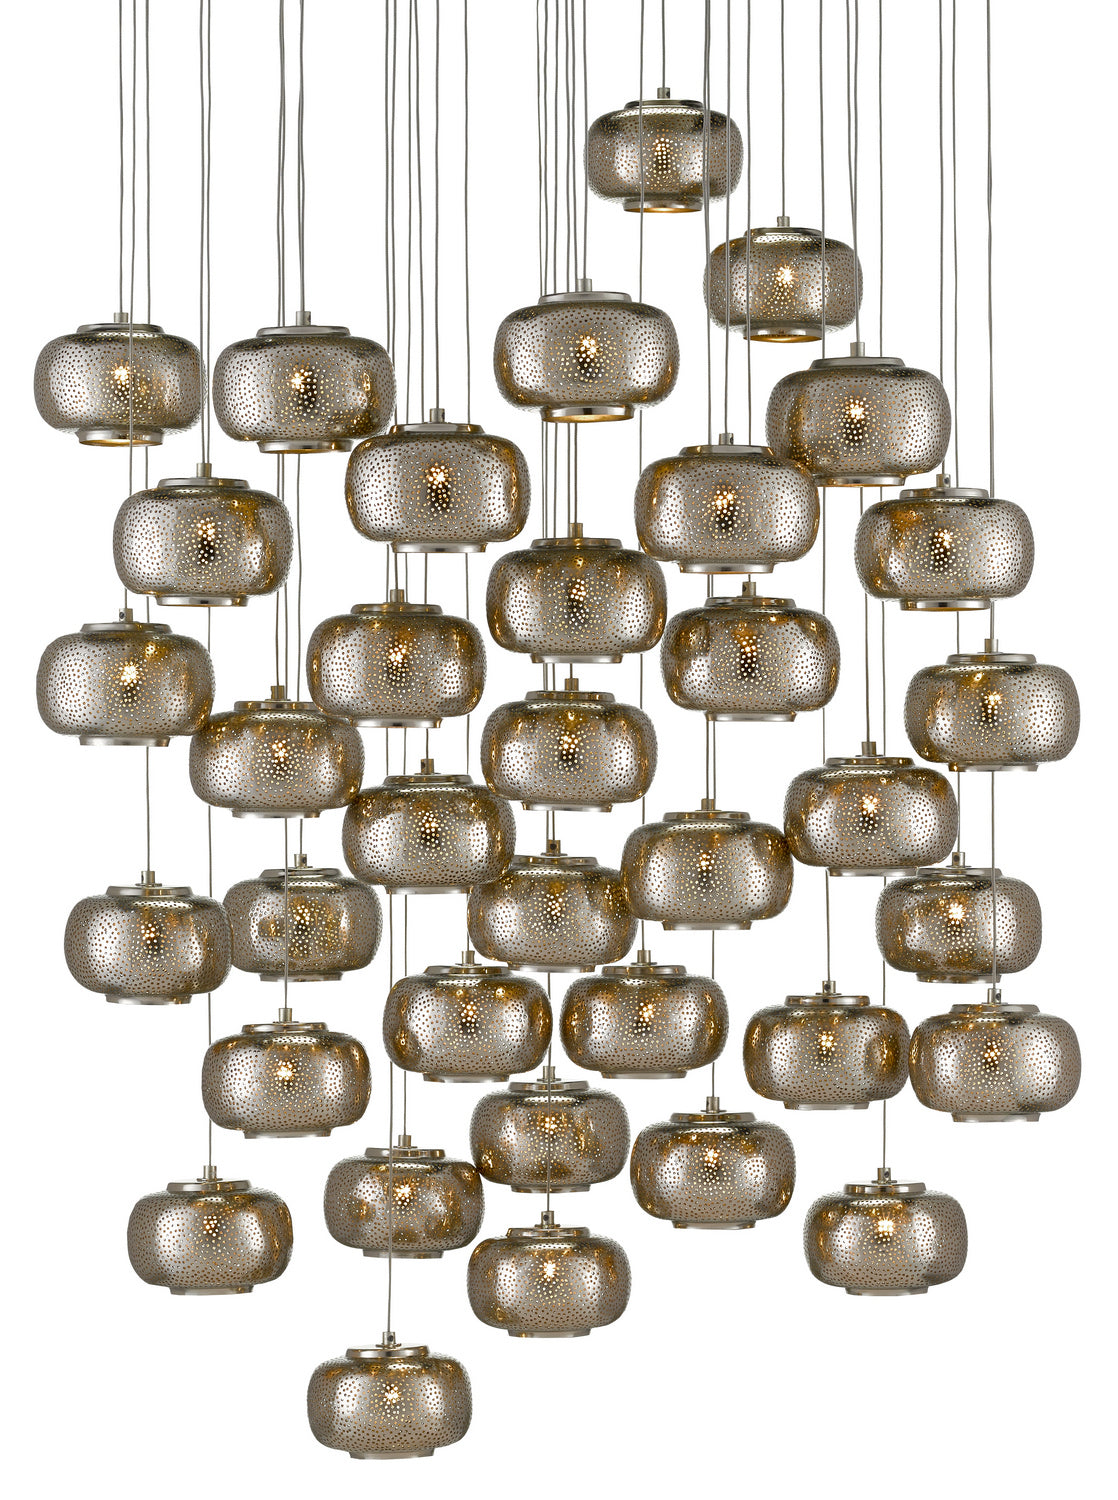 36 Light Pendant from the Pepper collection in Painted Silver/Nickel finish